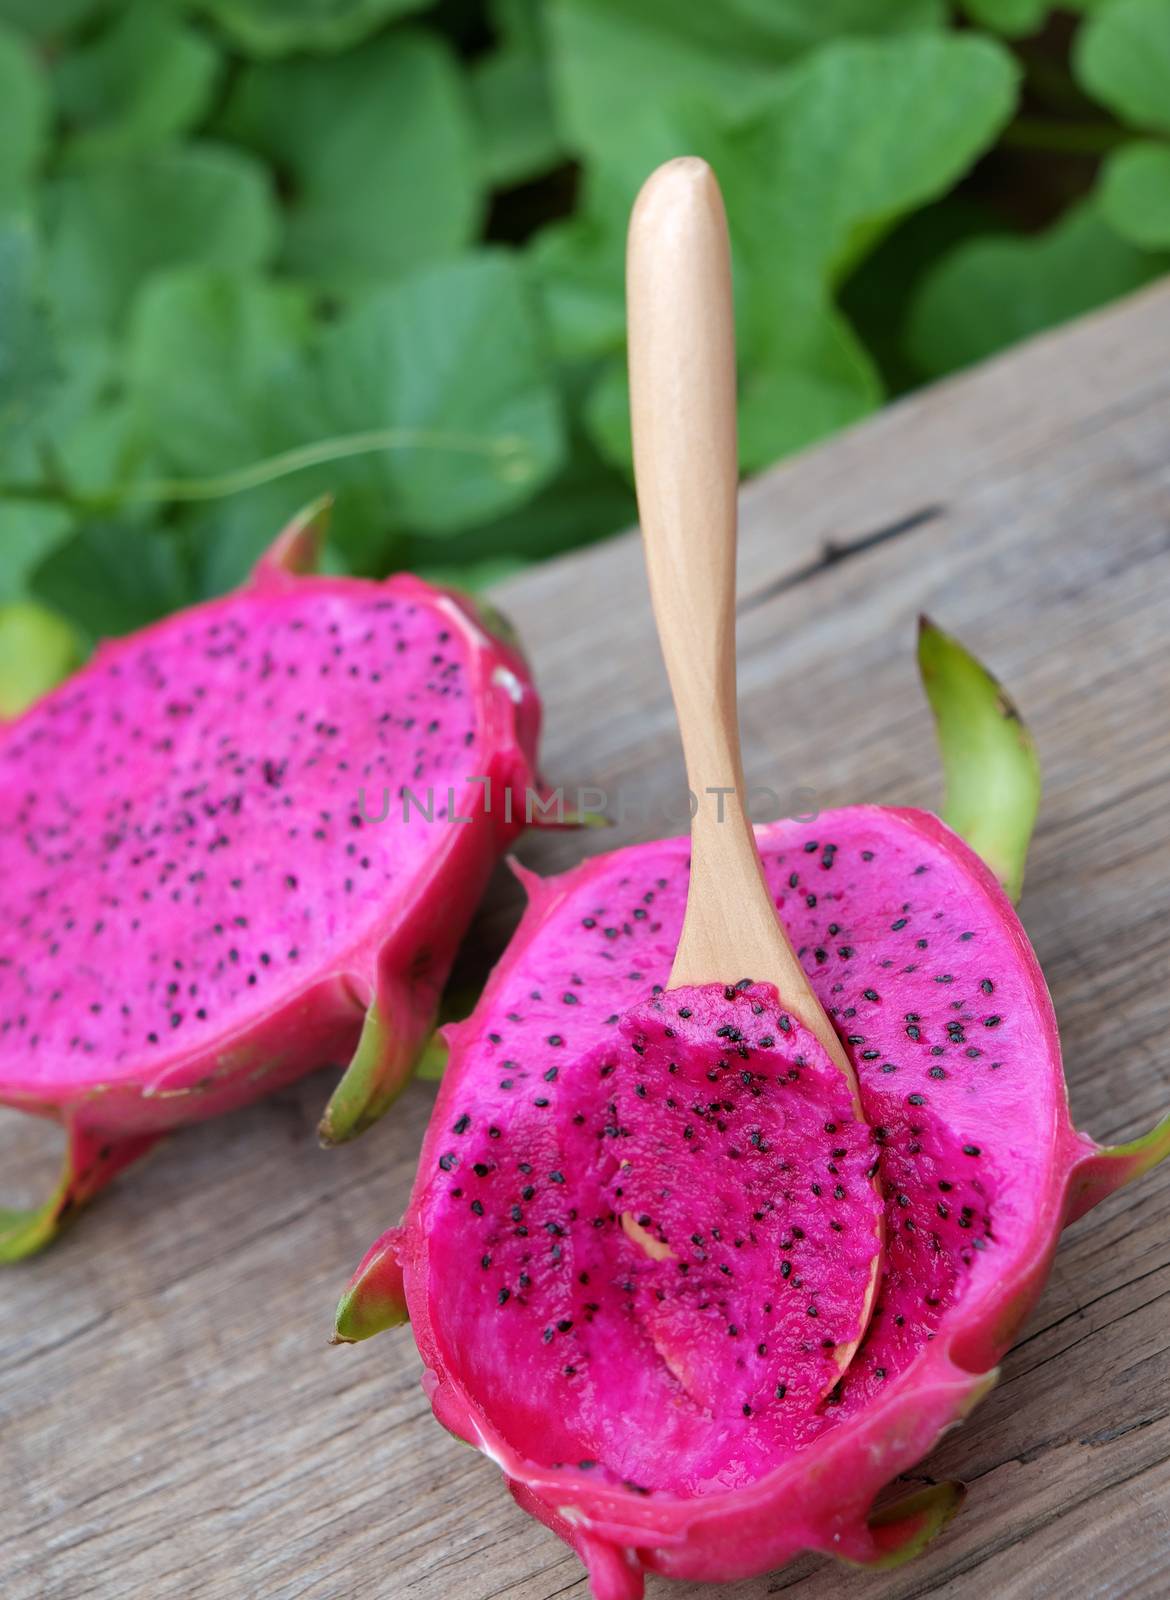 Eating dragon fruit, a tropical fruits, Vietnam agriculture product, with purle, pink color, close up of delicious dessert at garden